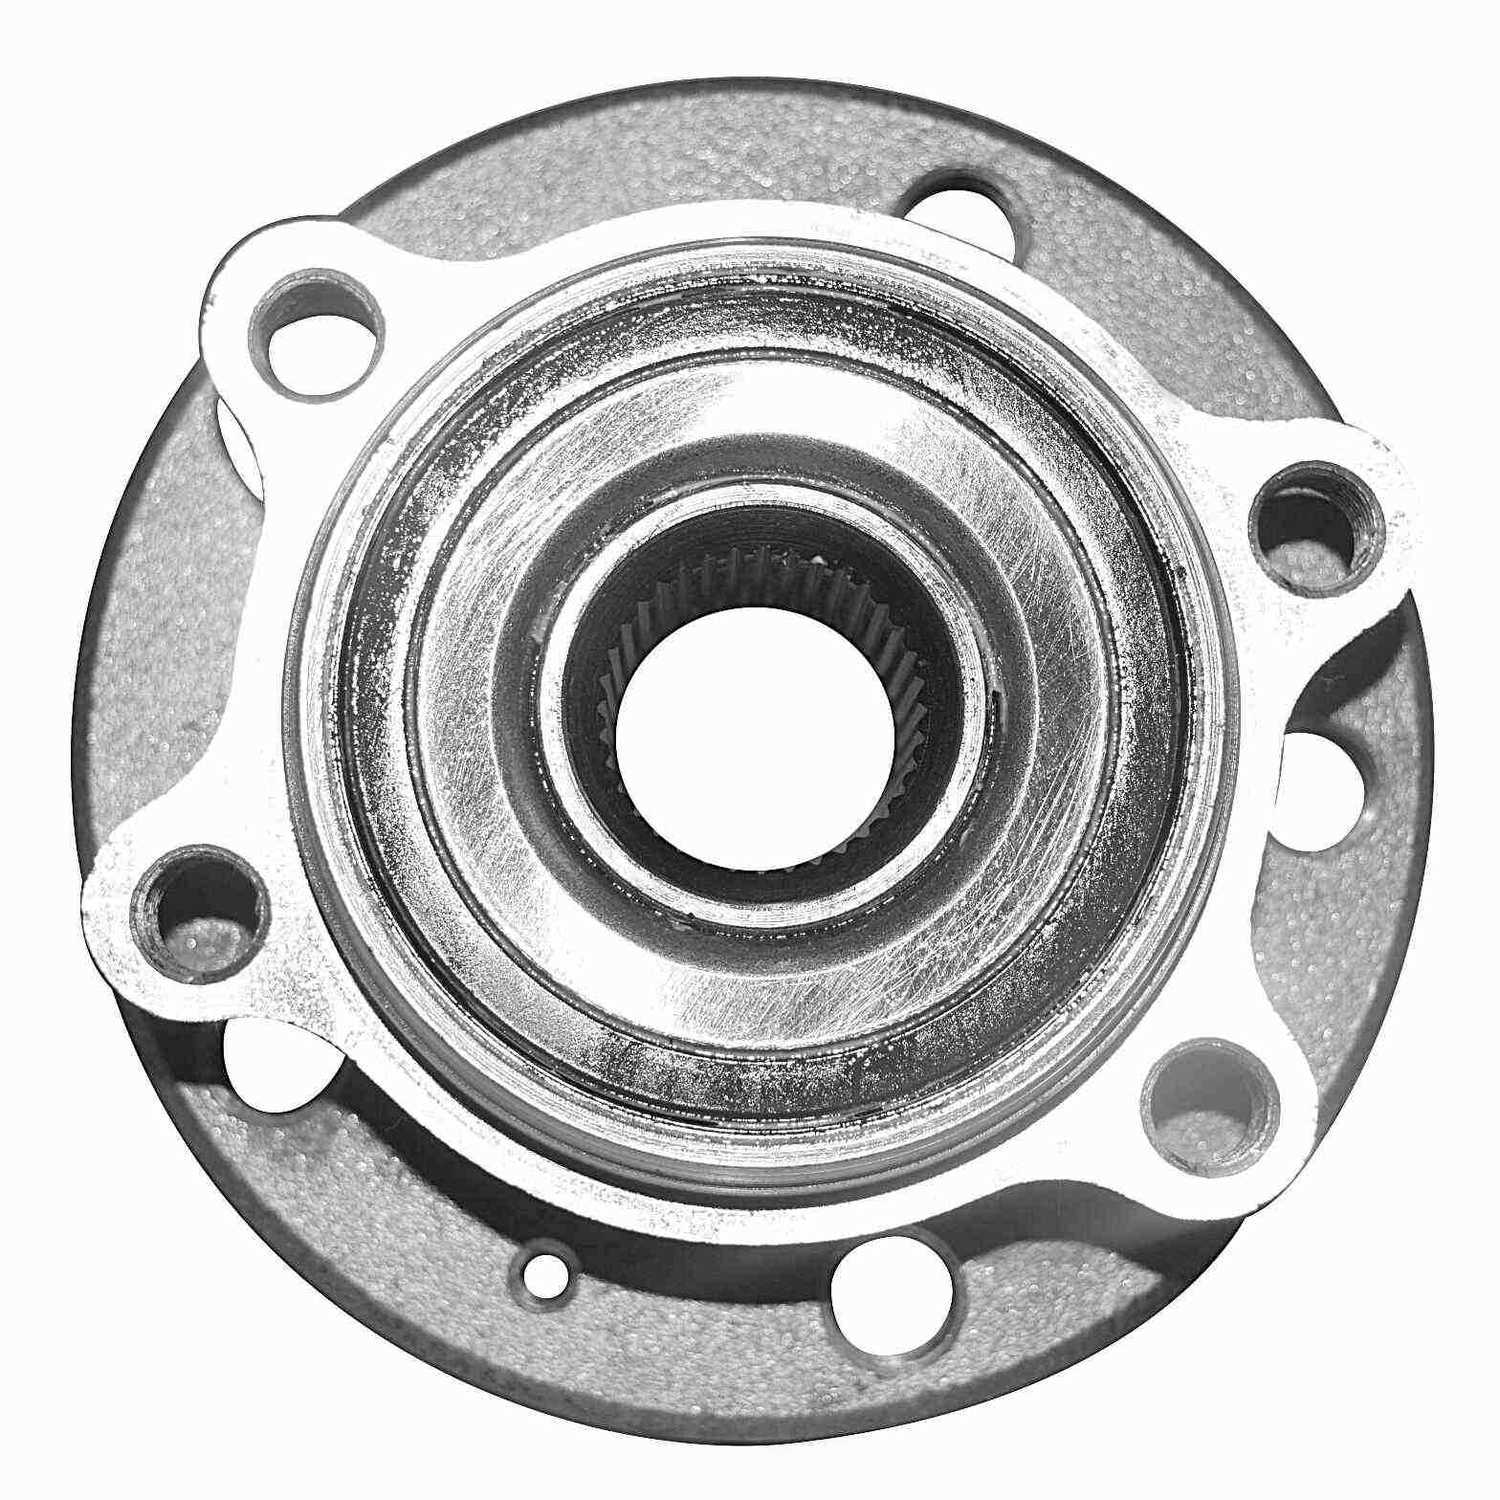 GSP NORTH AMERICA INC. - GSP Axle Bearing & Hub Assembly - AD8 234253